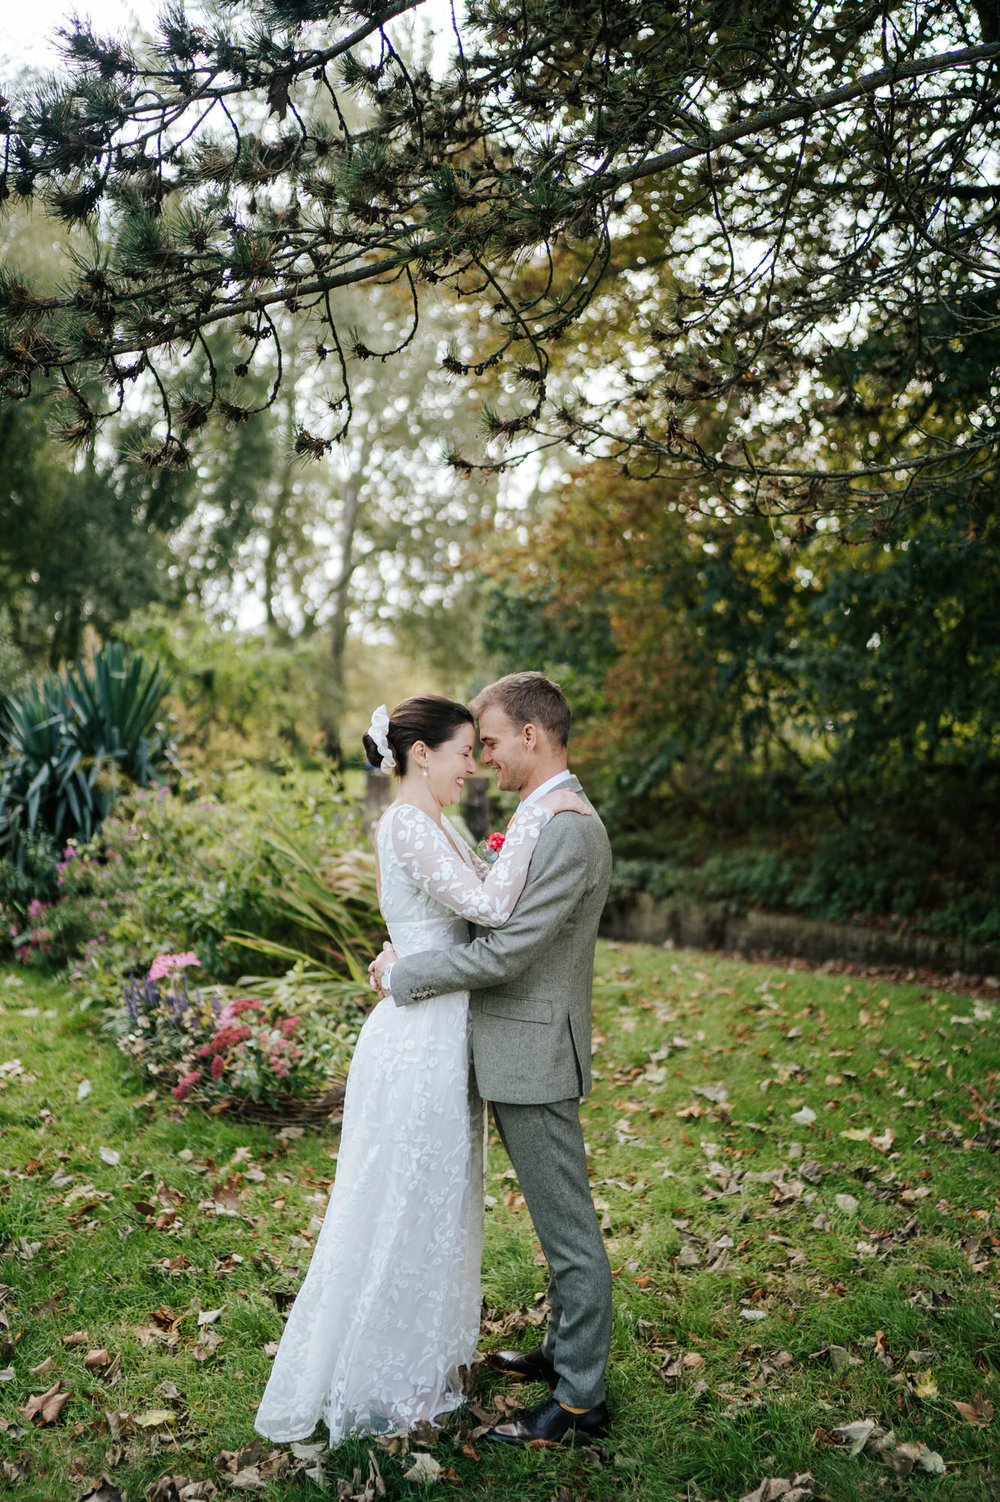 Bride and groom touch their foreheads together in tender moment during wedding at Orleans House Gallery in the Autumn